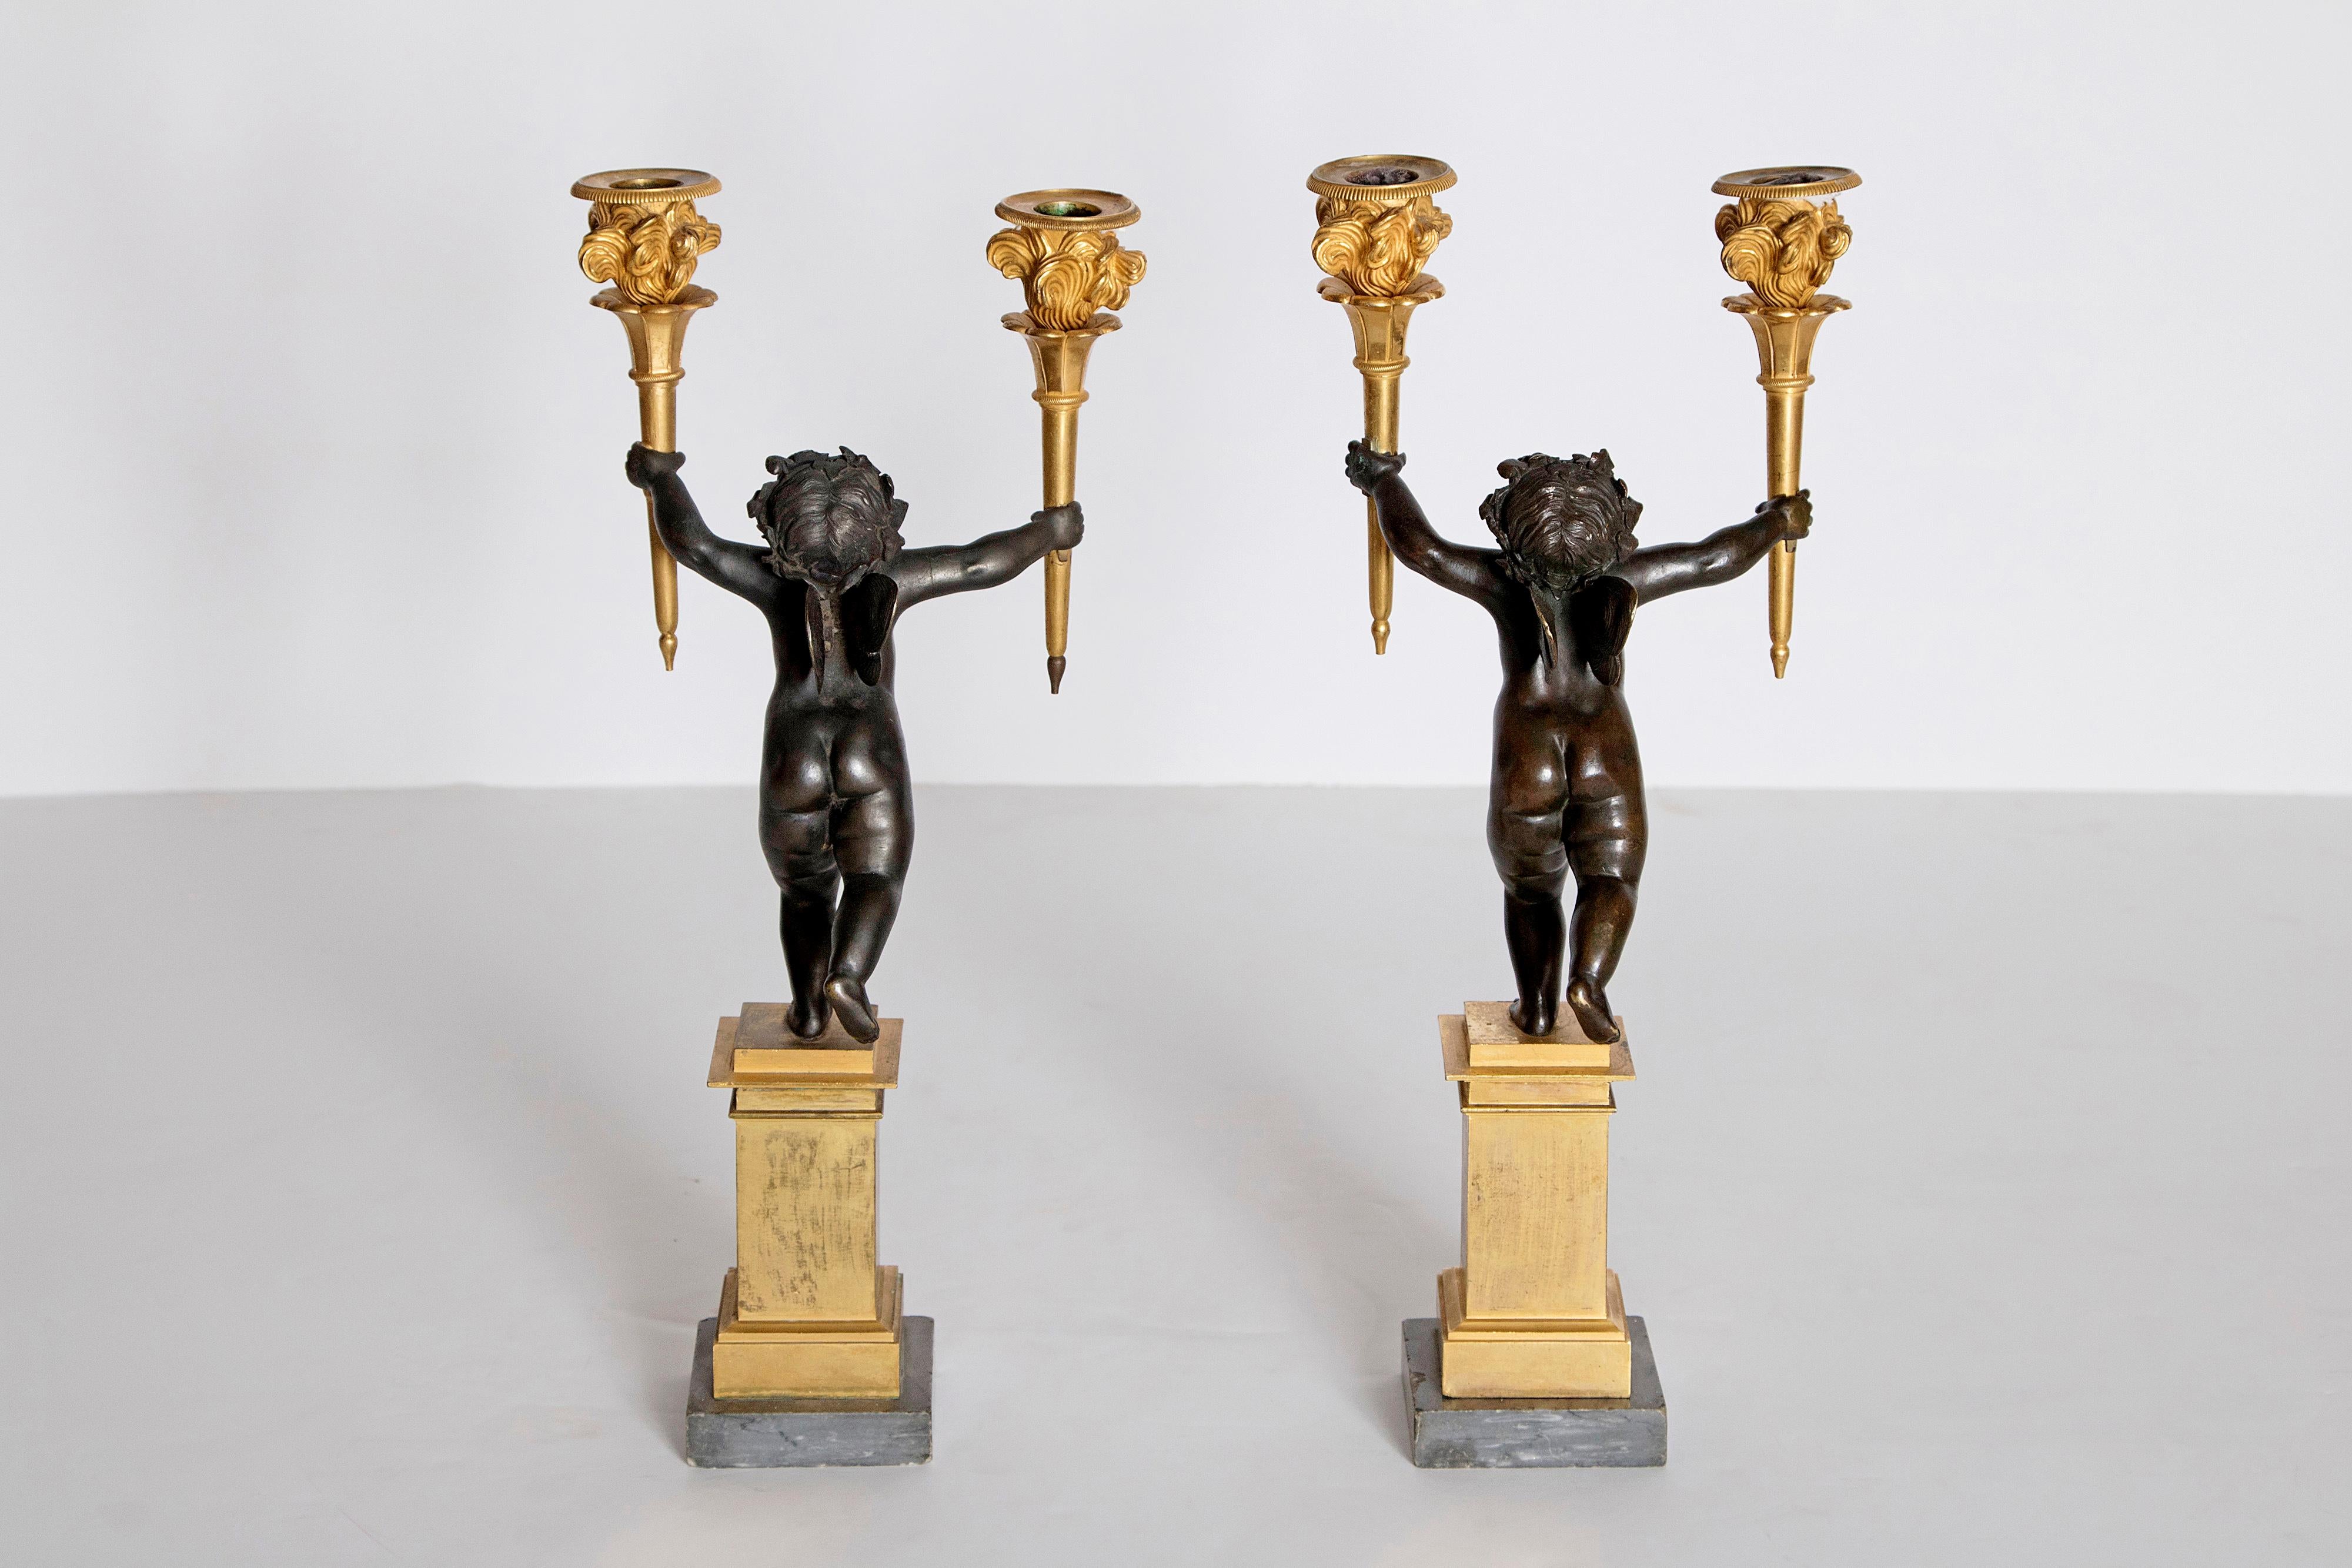 Pair of French Charles X Patinated Bronze and Gilt Figurative Candelabras For Sale 3